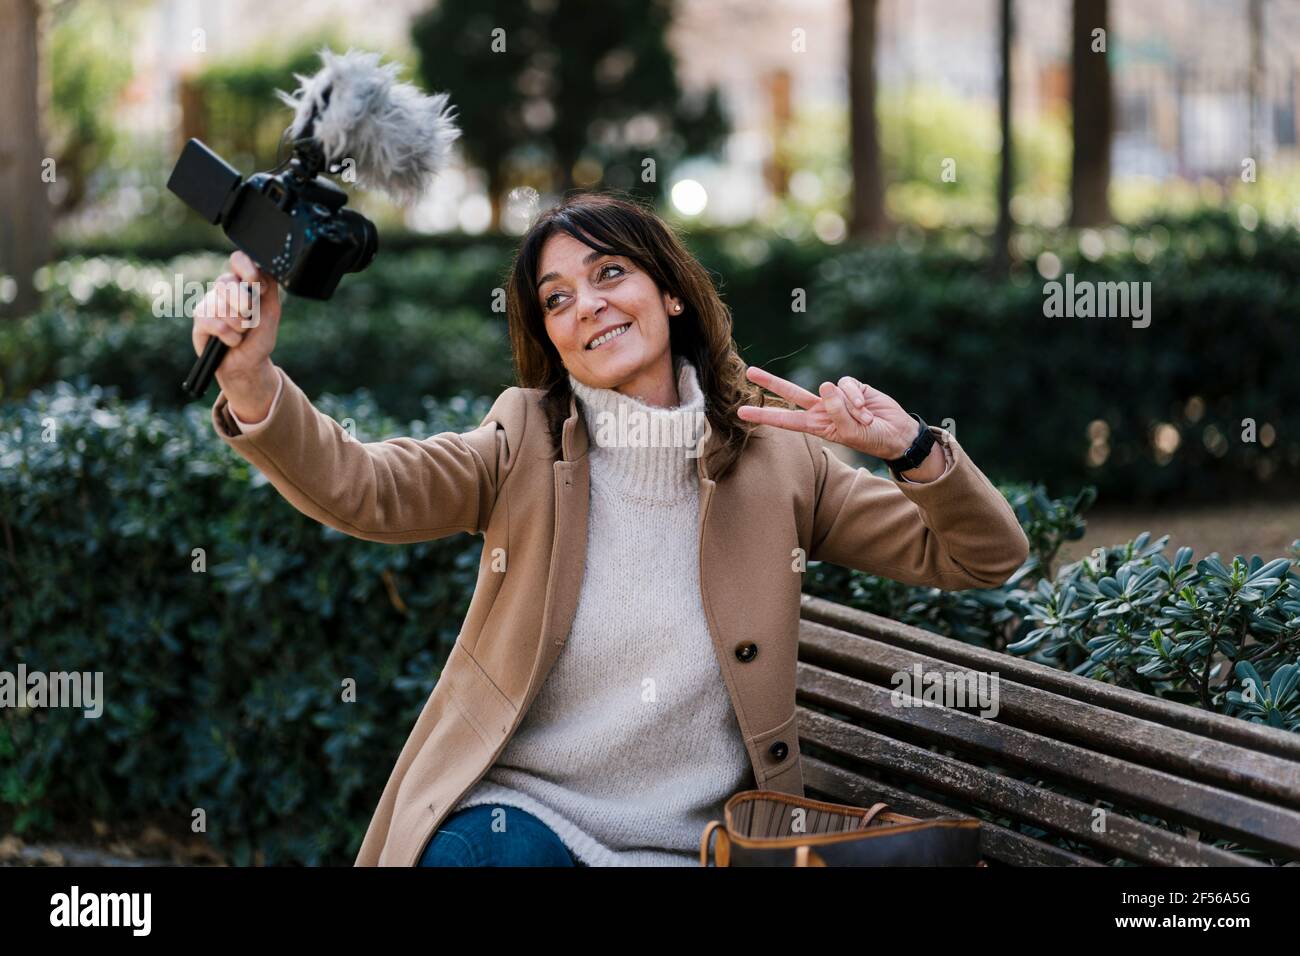 Smiling woman gesturing peace sign while taking selfie through camera at park Stock Photo